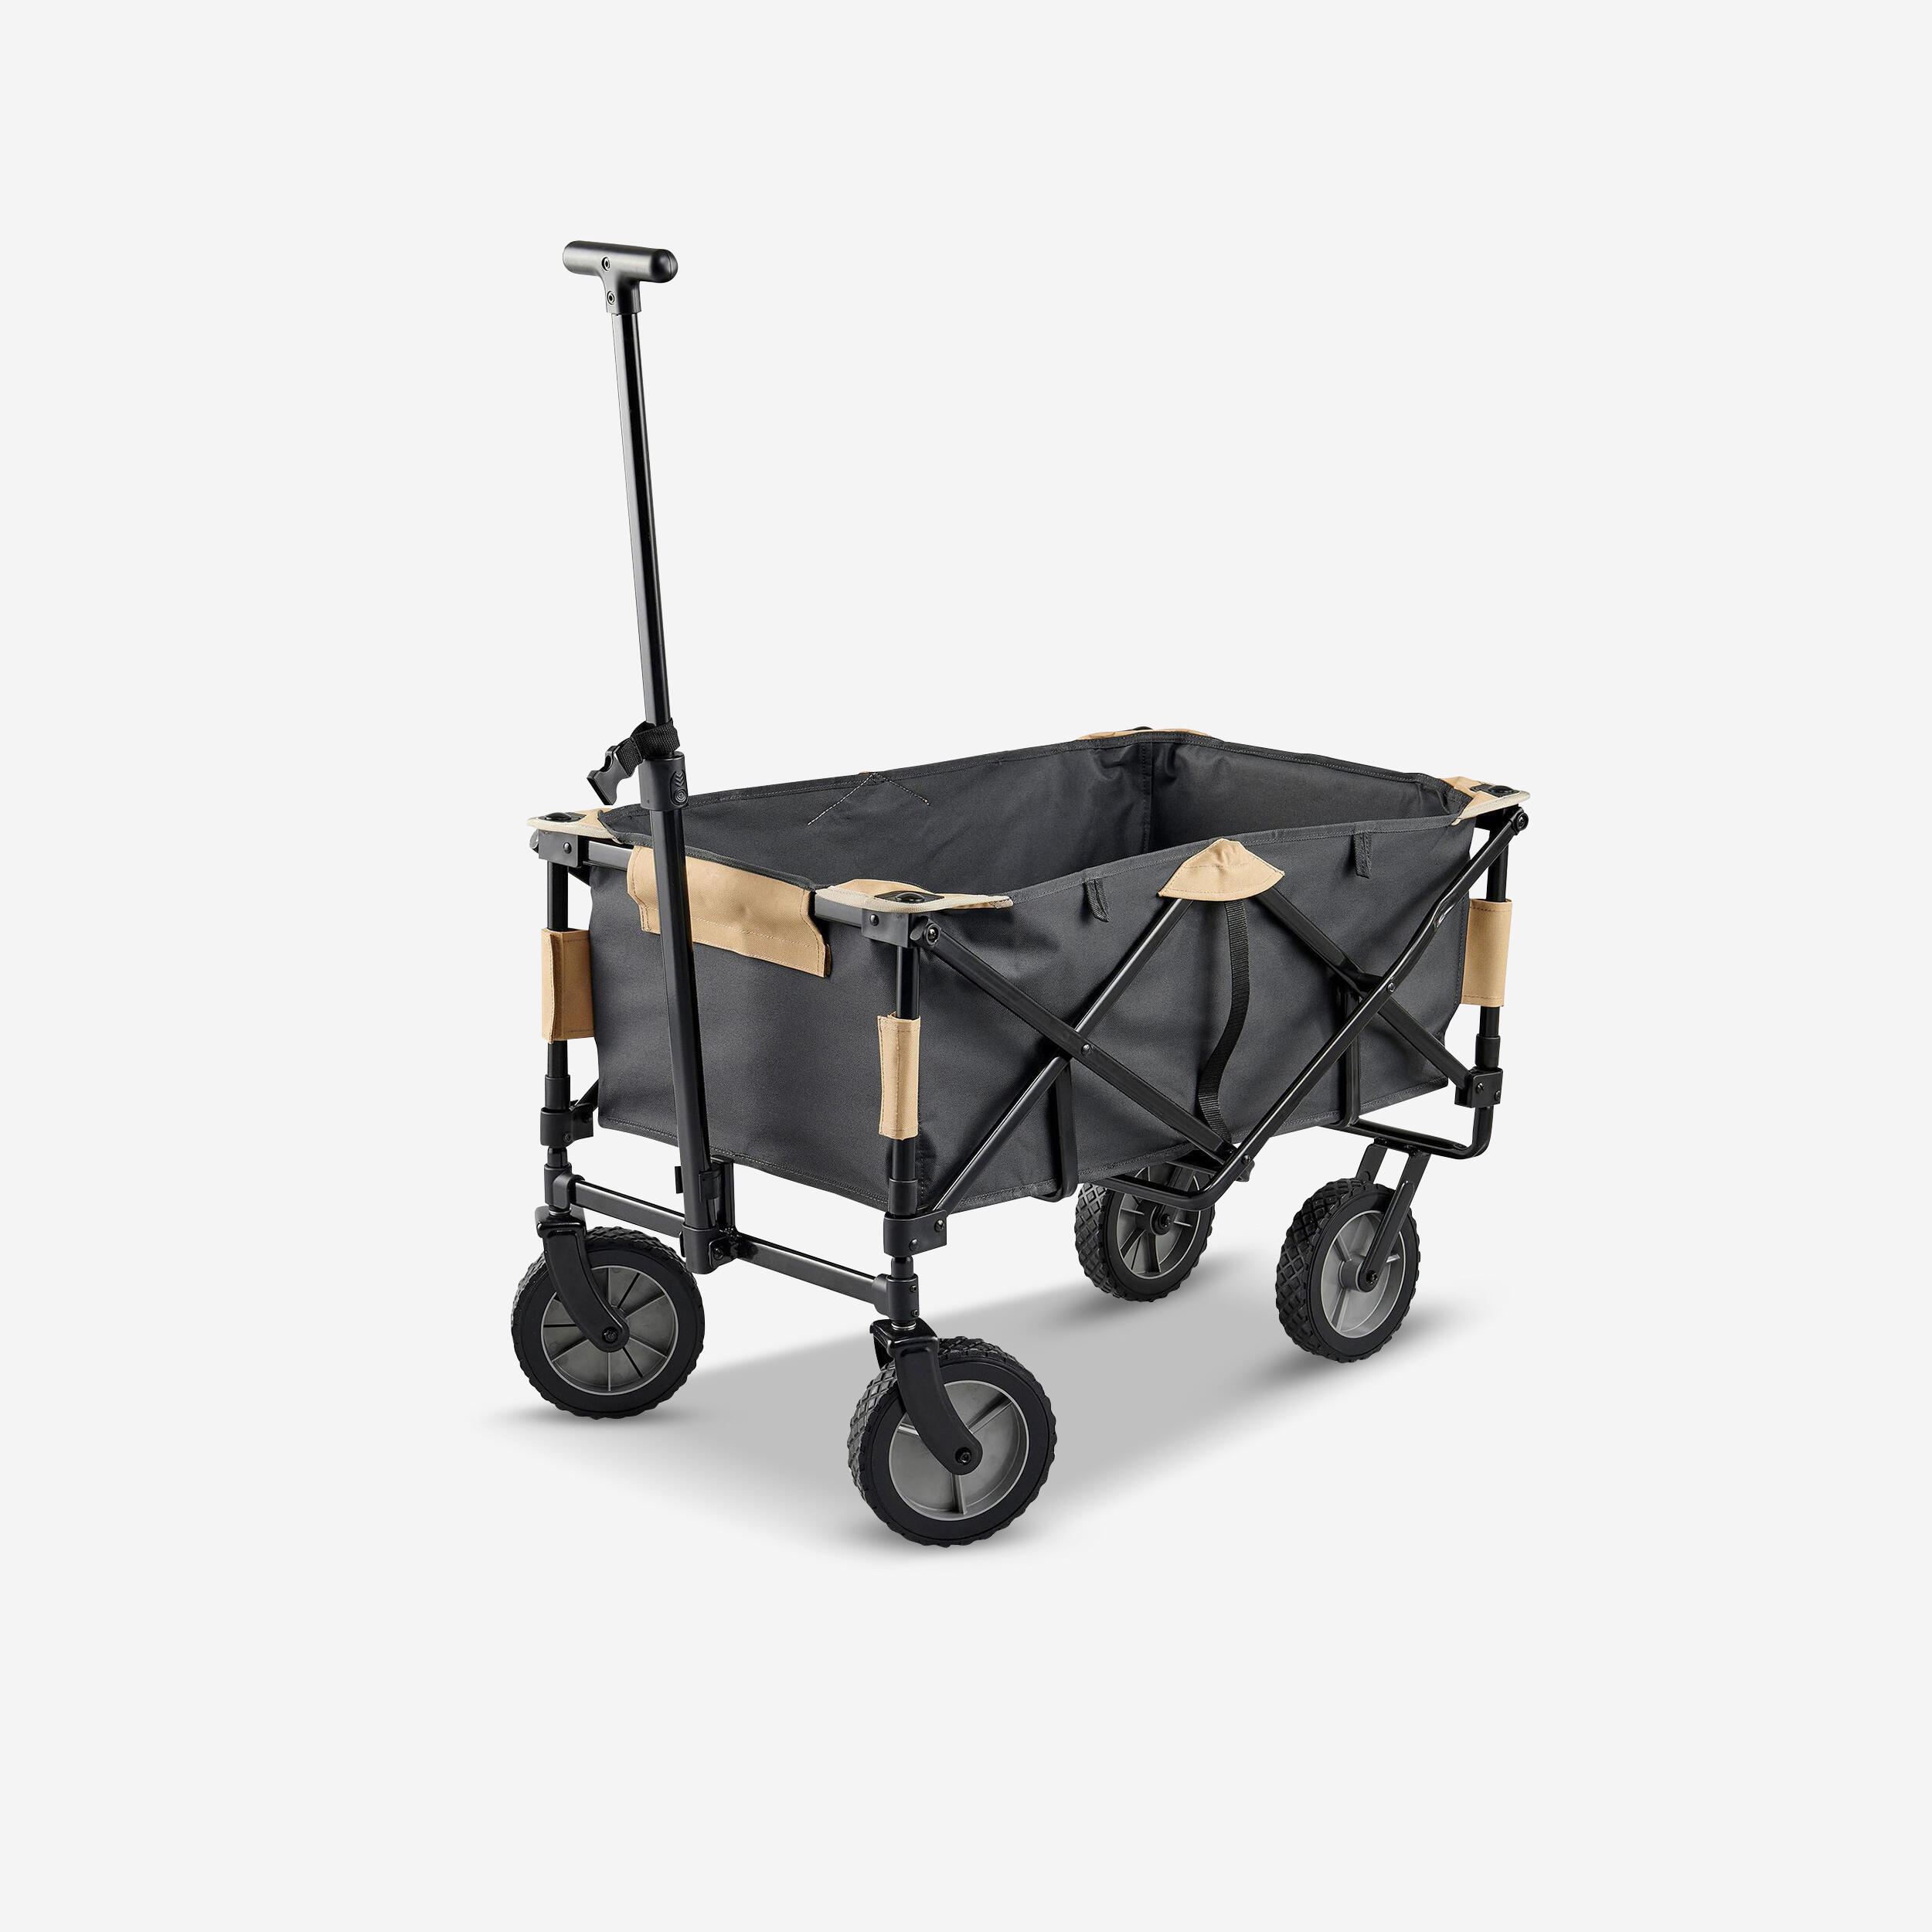 FOLDING TRANSPORT CART FOR CAMPING EQUIPMENT - TROLLEY 1/10